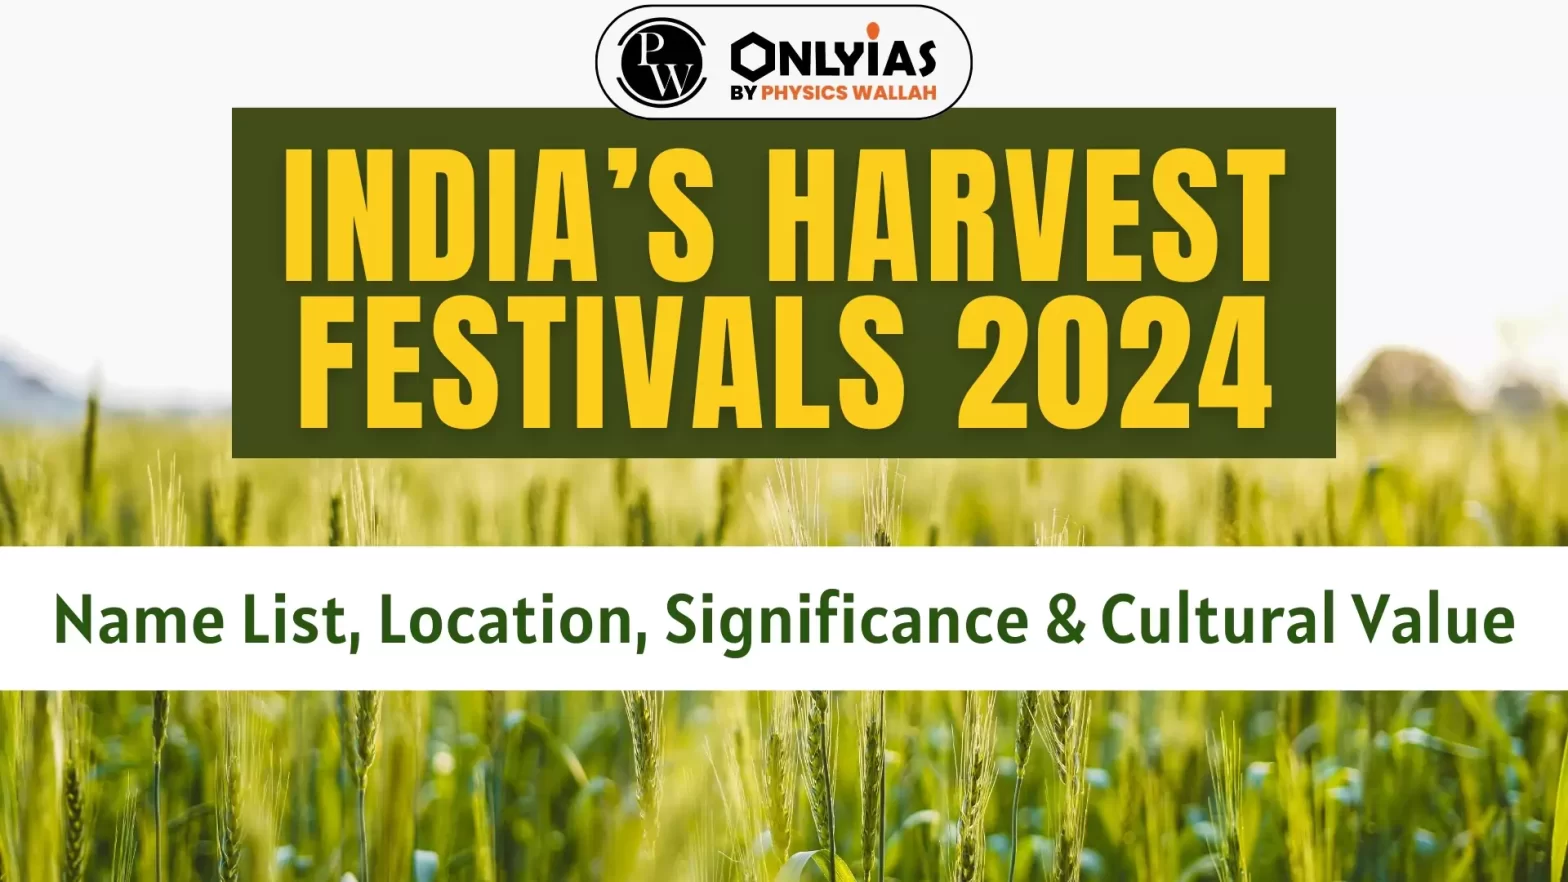 India’s Harvest Festivals: Name List, Location, Significance & Cultural Value